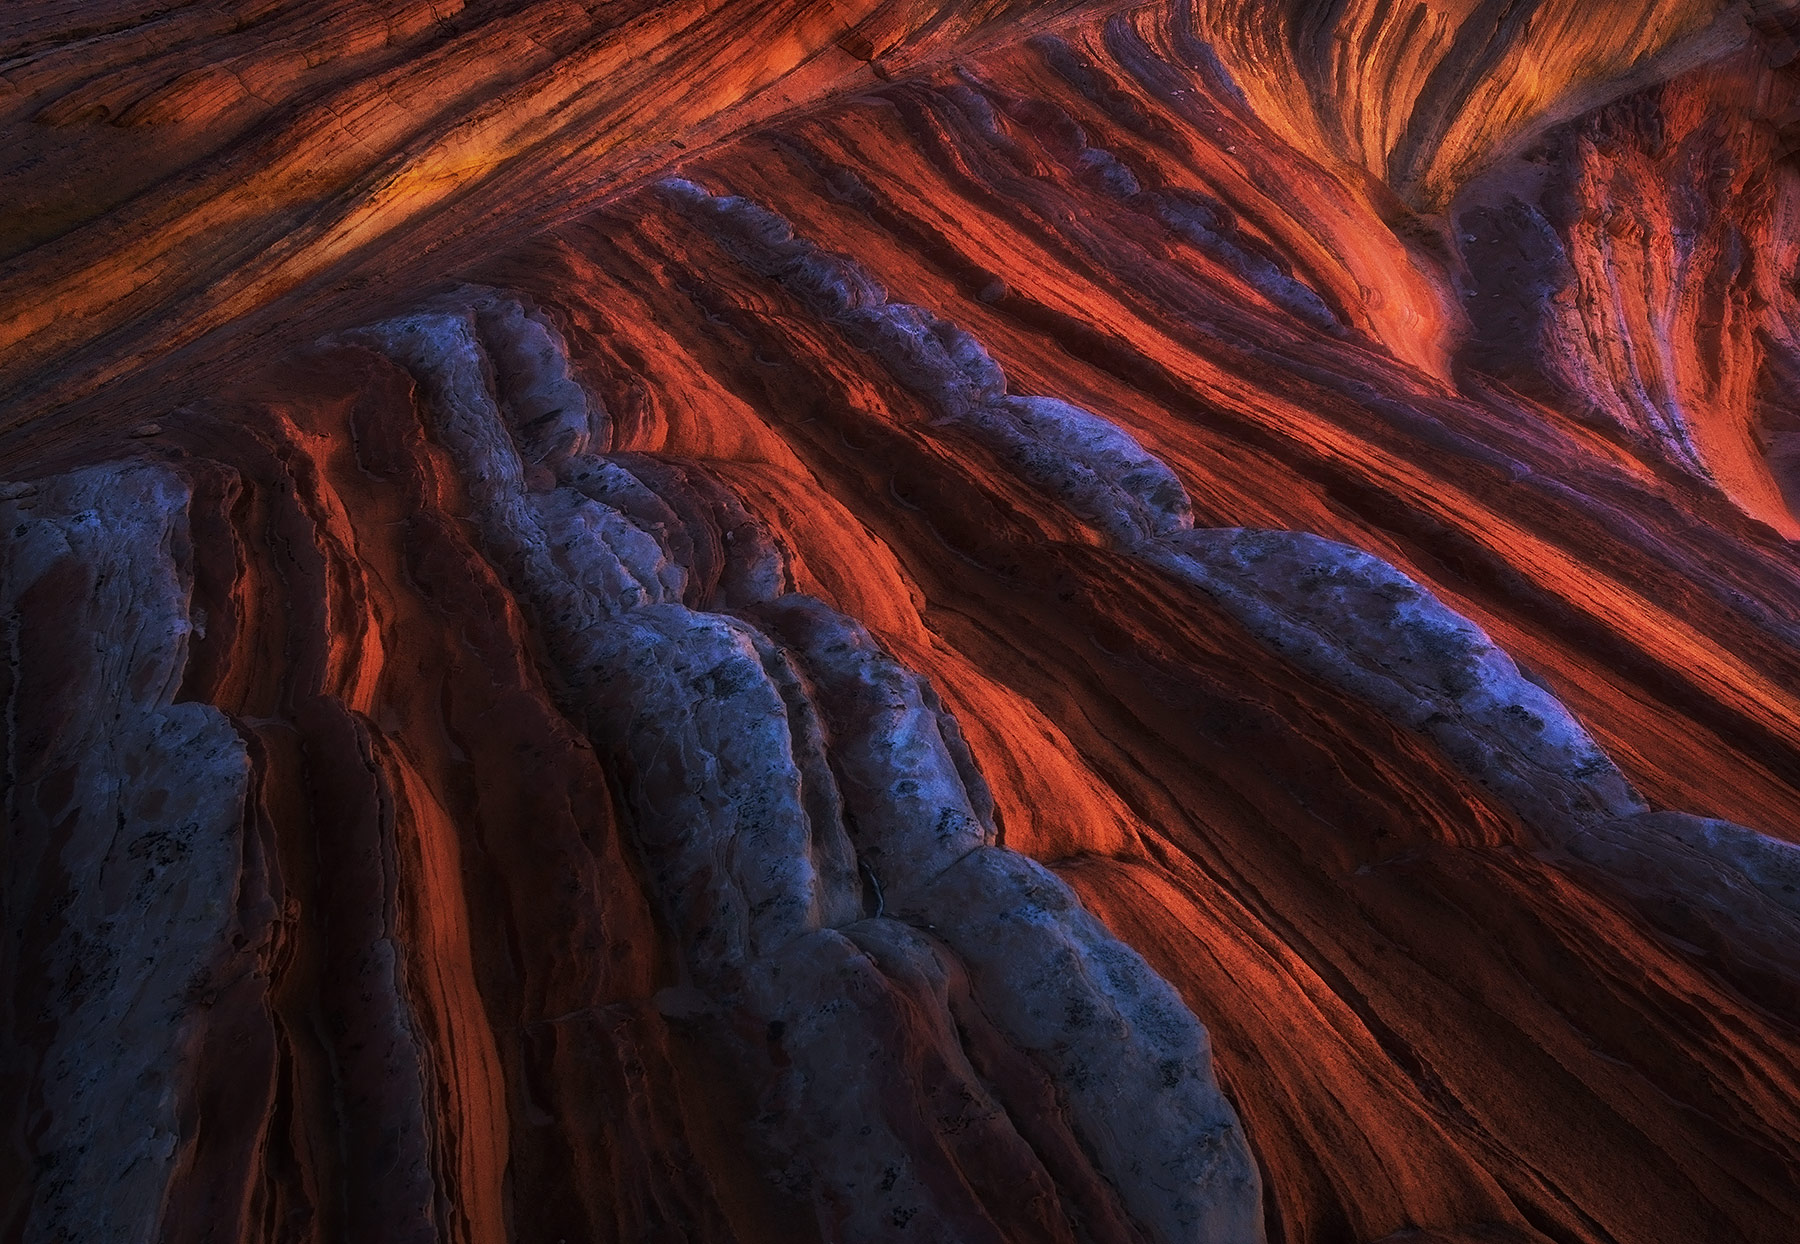 The amazing colors of reflected light on sandstone.